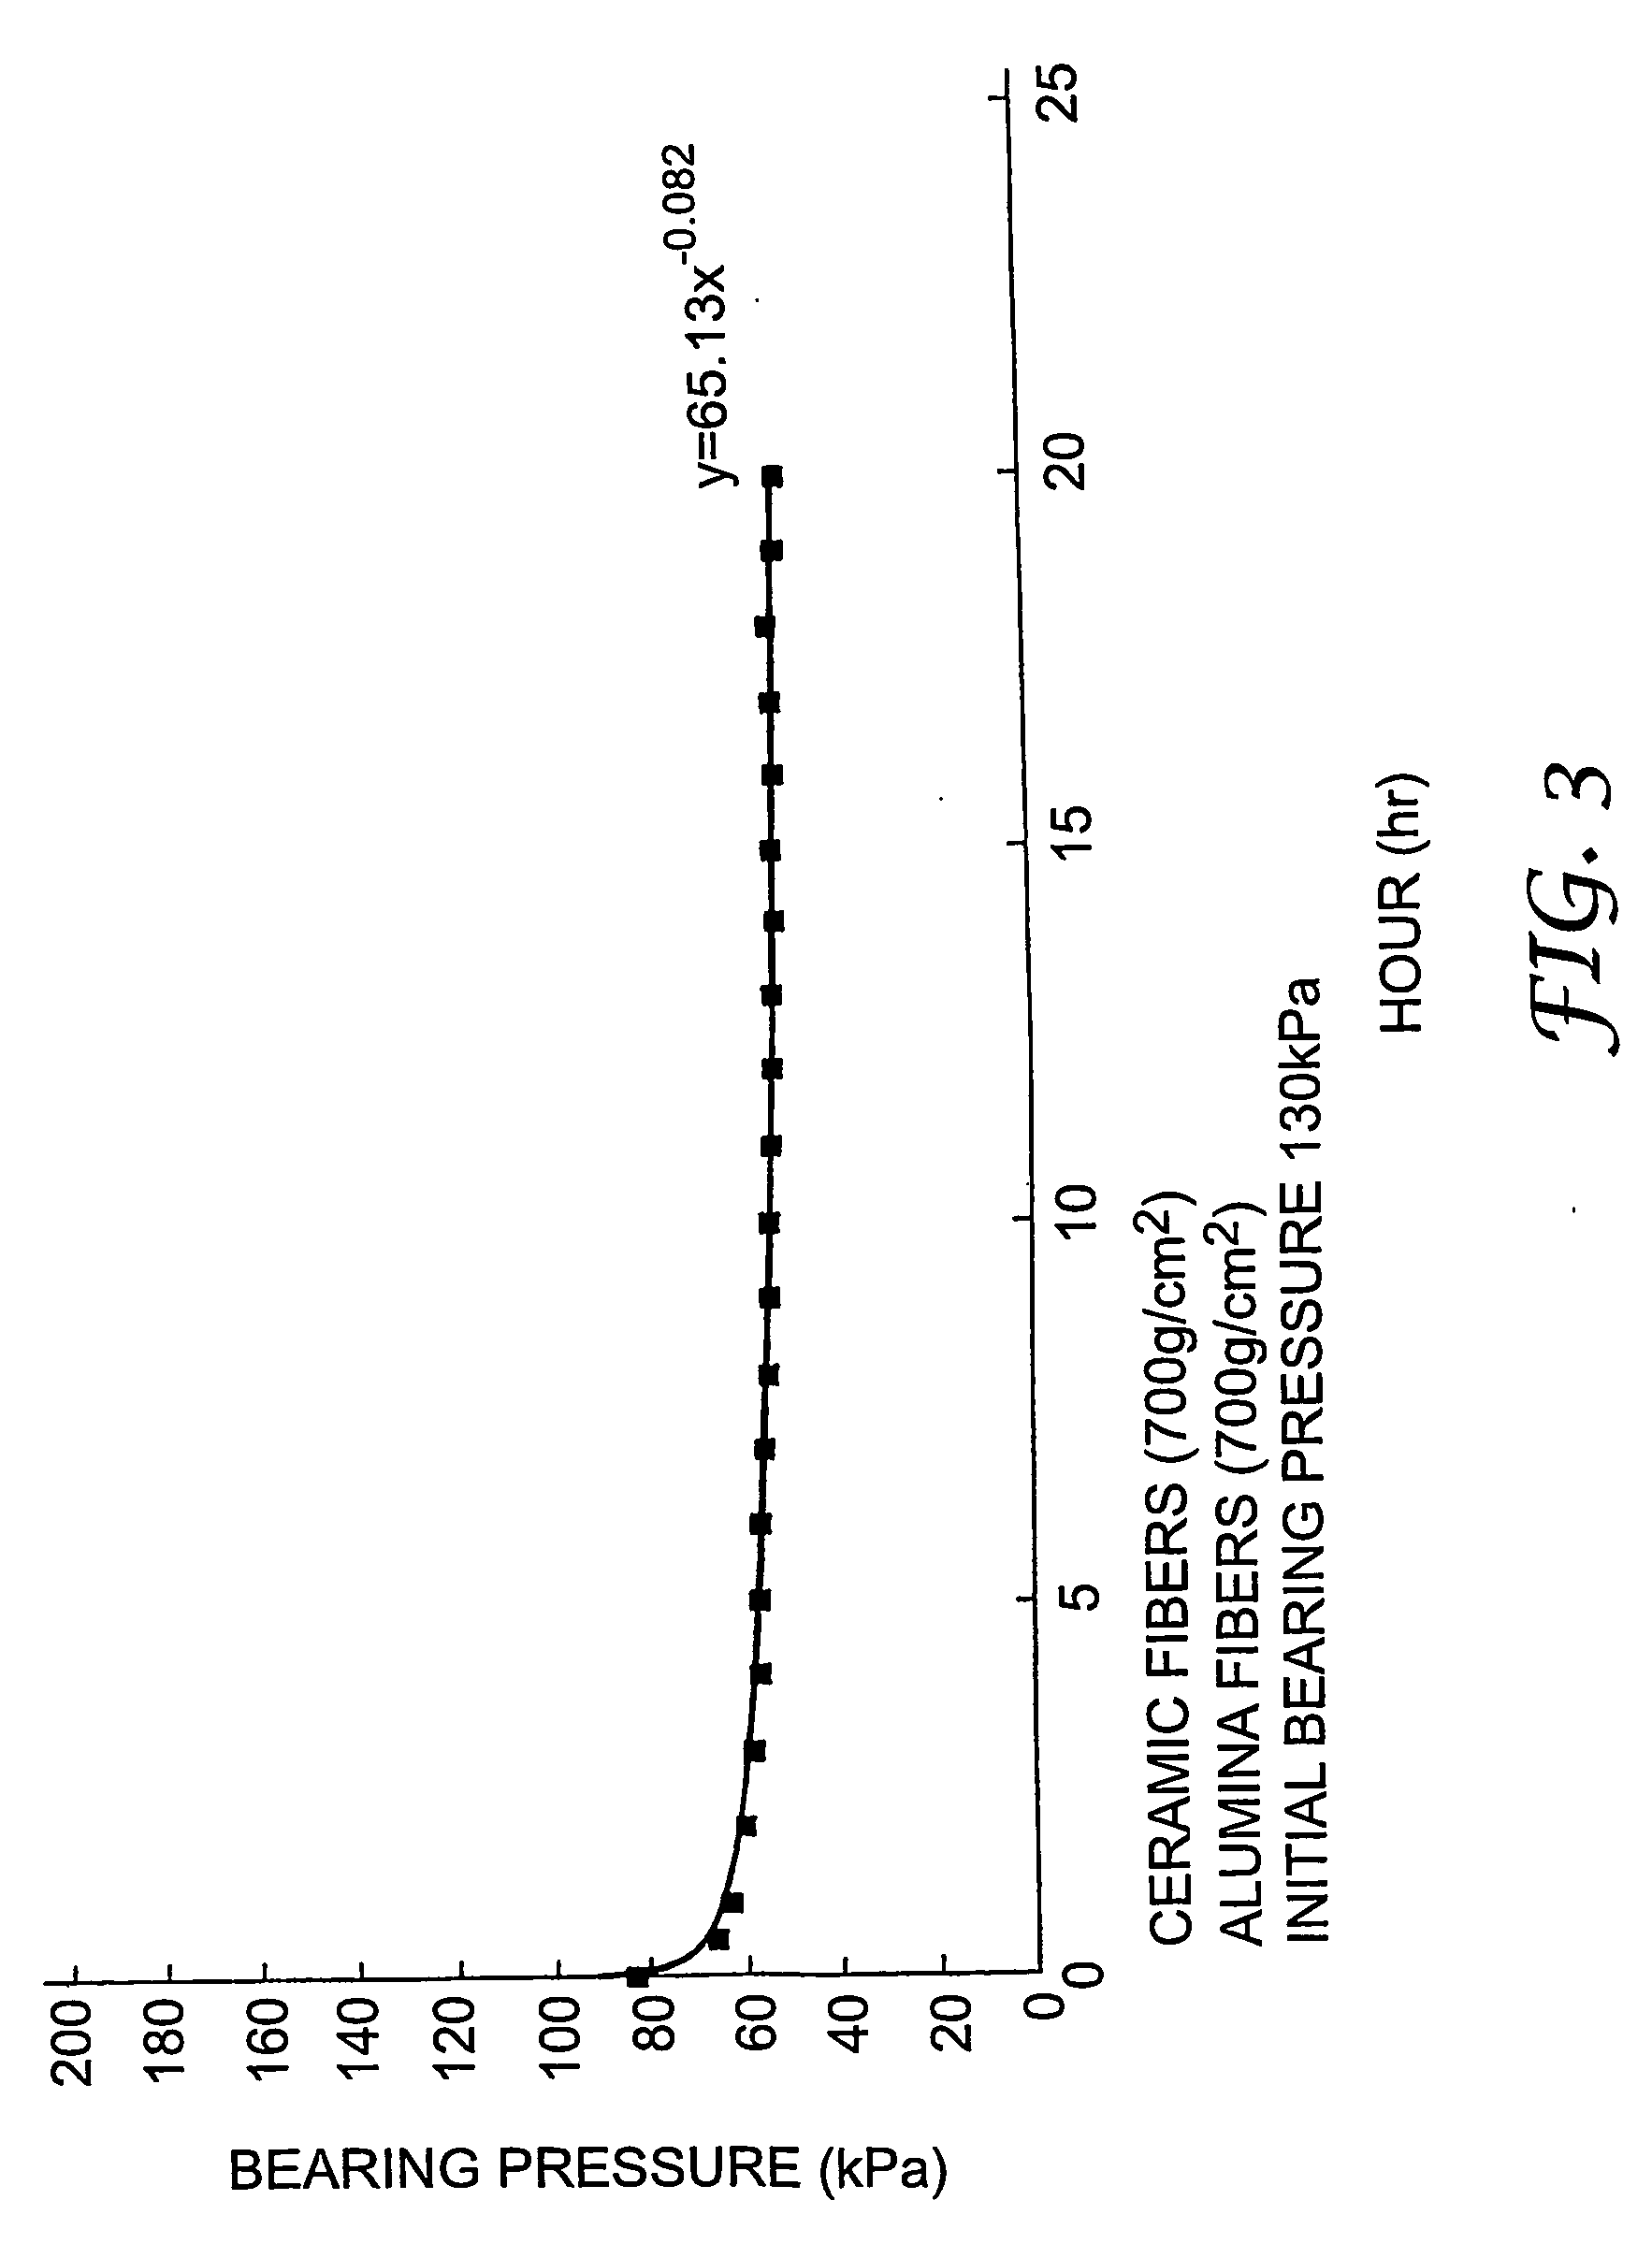 Pollution control device and mat for mounting a pollution control element